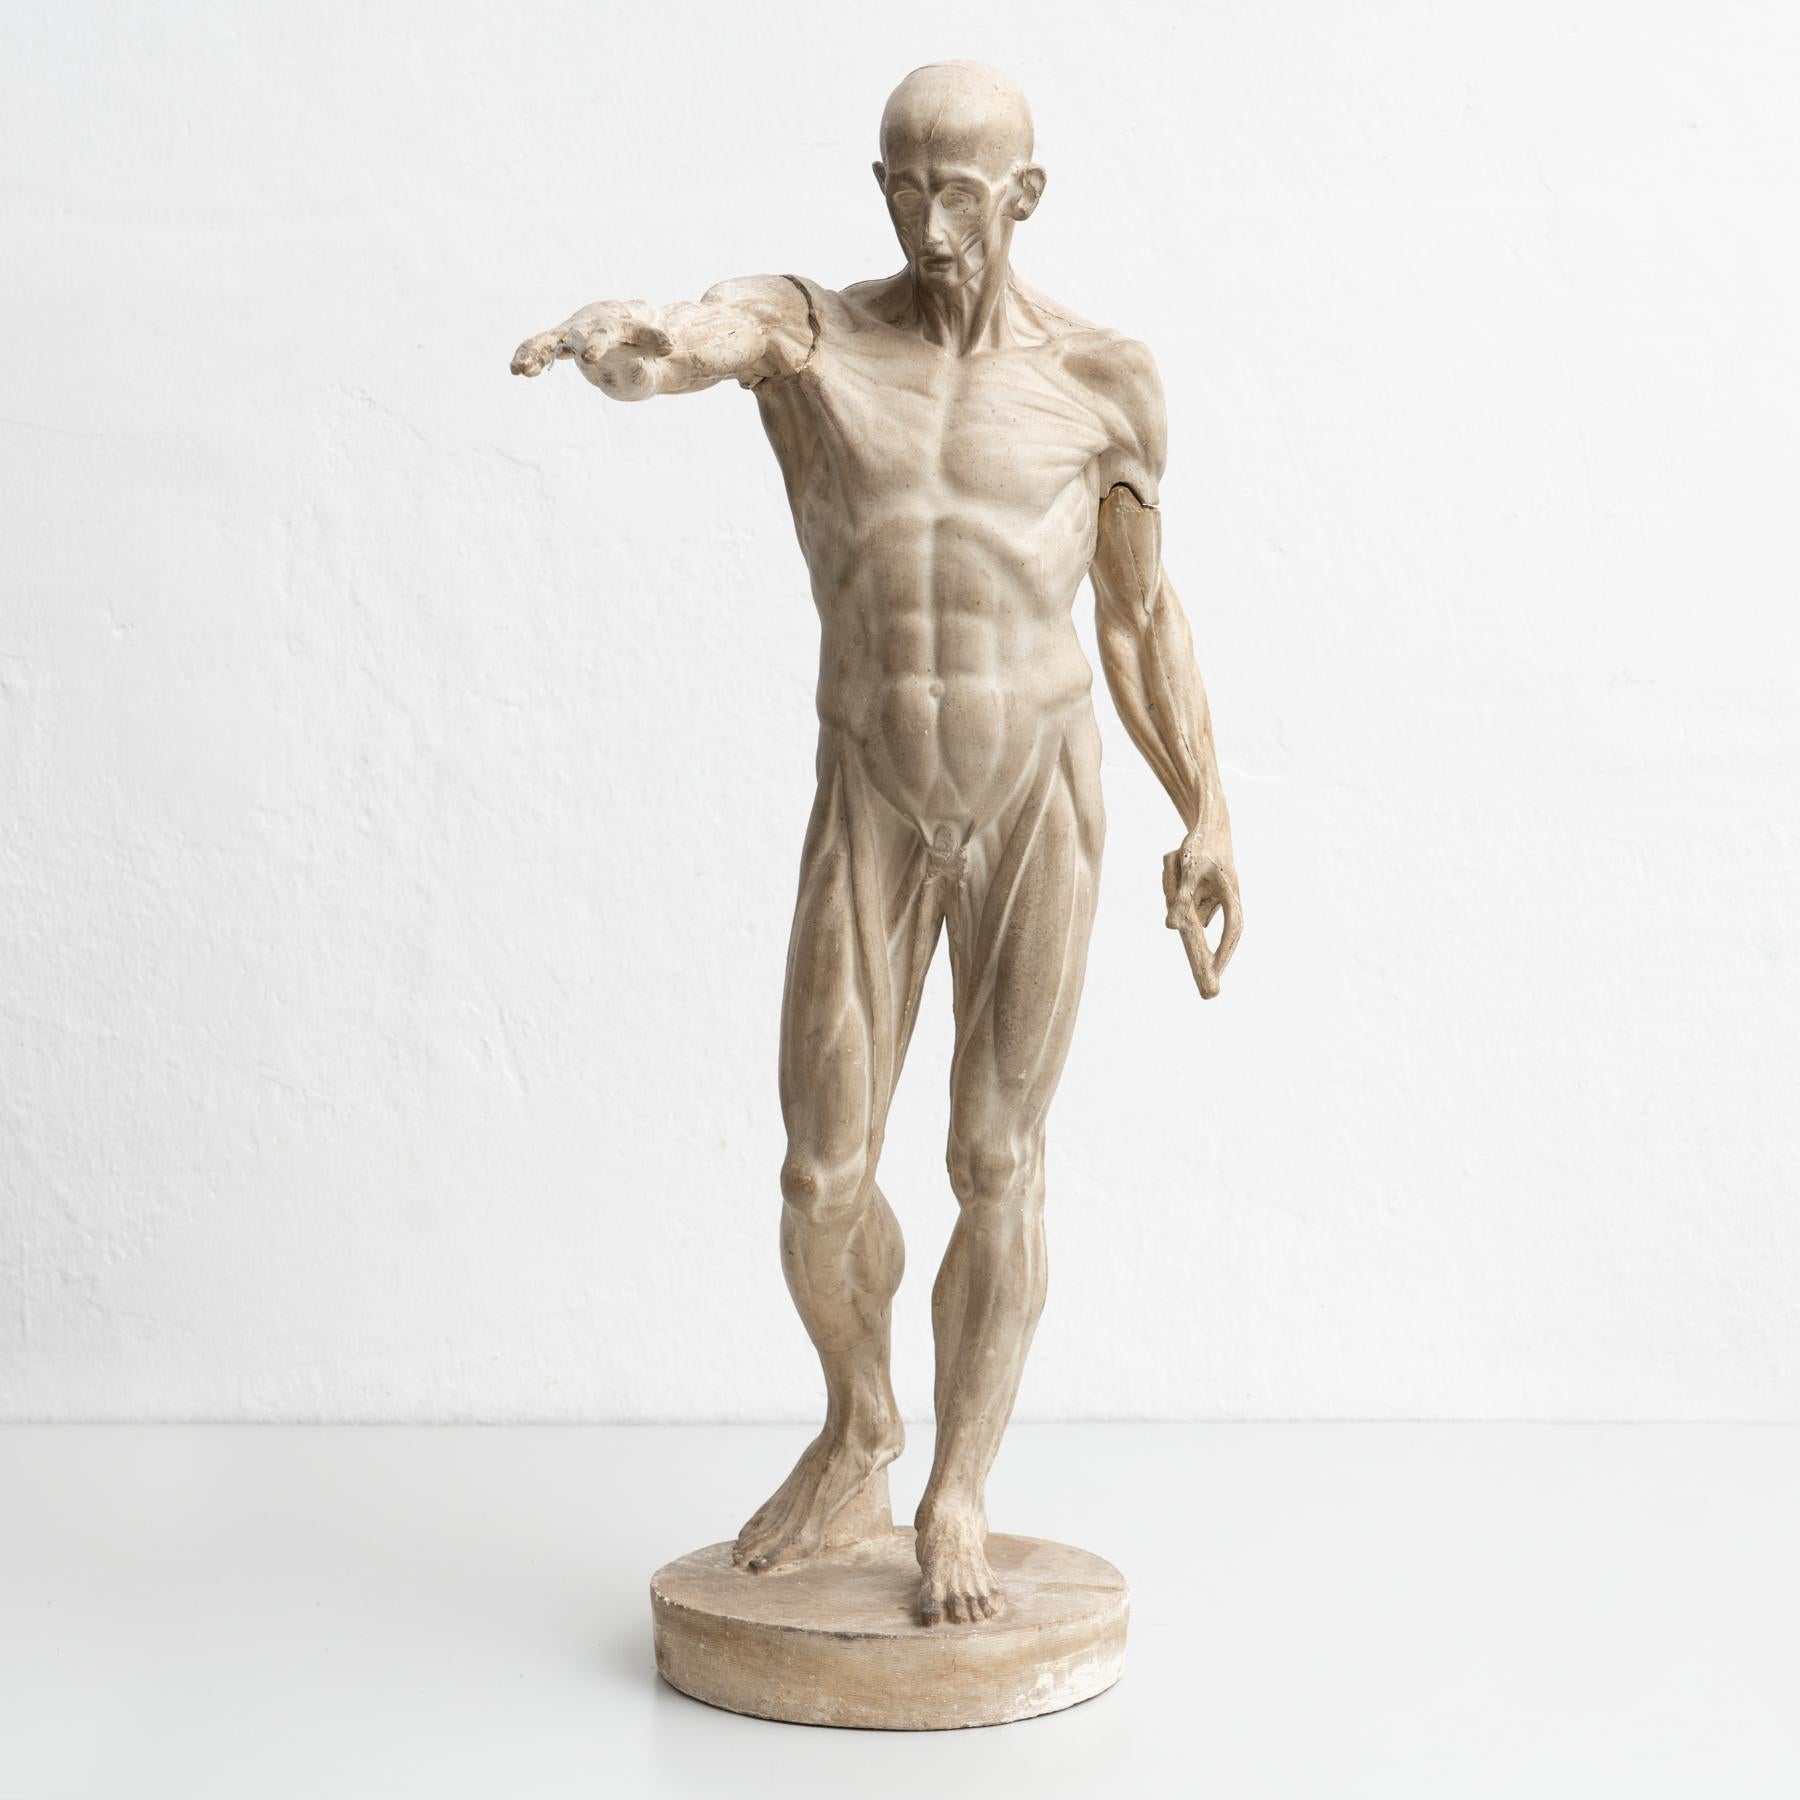 Exceptional early Plaster human anatomy sculpture of a man.

Made Spain, circa 1930.

In original condition, with minor wear consistent with age and use, preserving a beautiful patina. Some parts are missing as shown on the